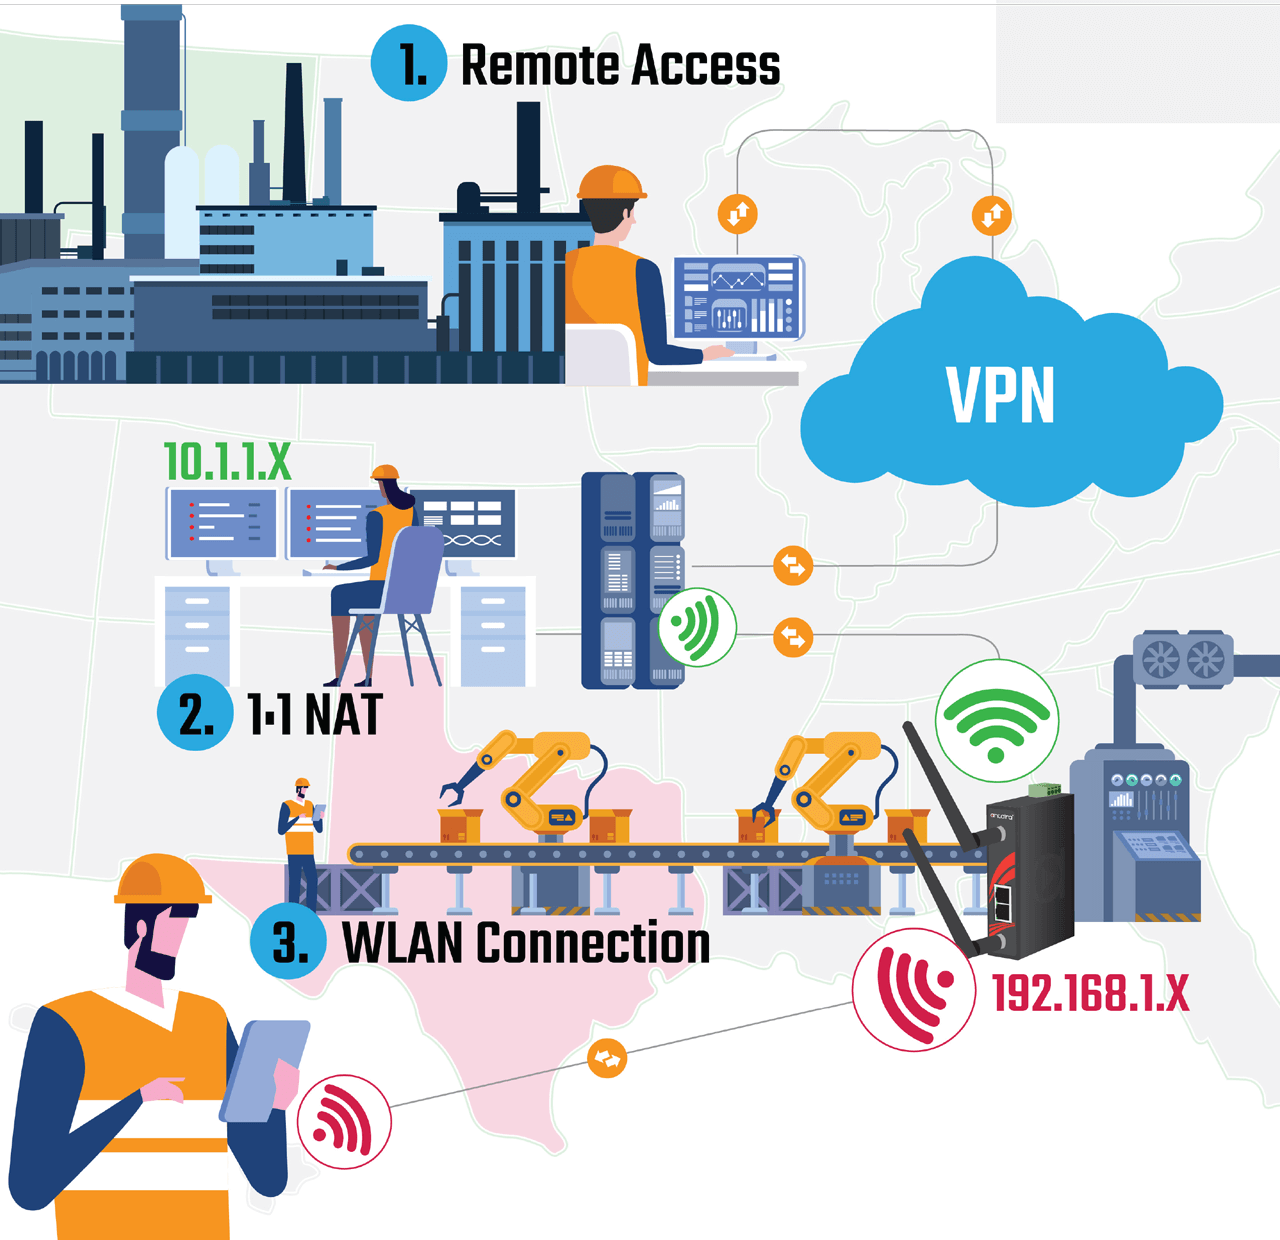 NAT (Network Address Translation) routers can be used to conceal the identity of an IP address block being used on a network, and can become part of a company's remote access strategy.